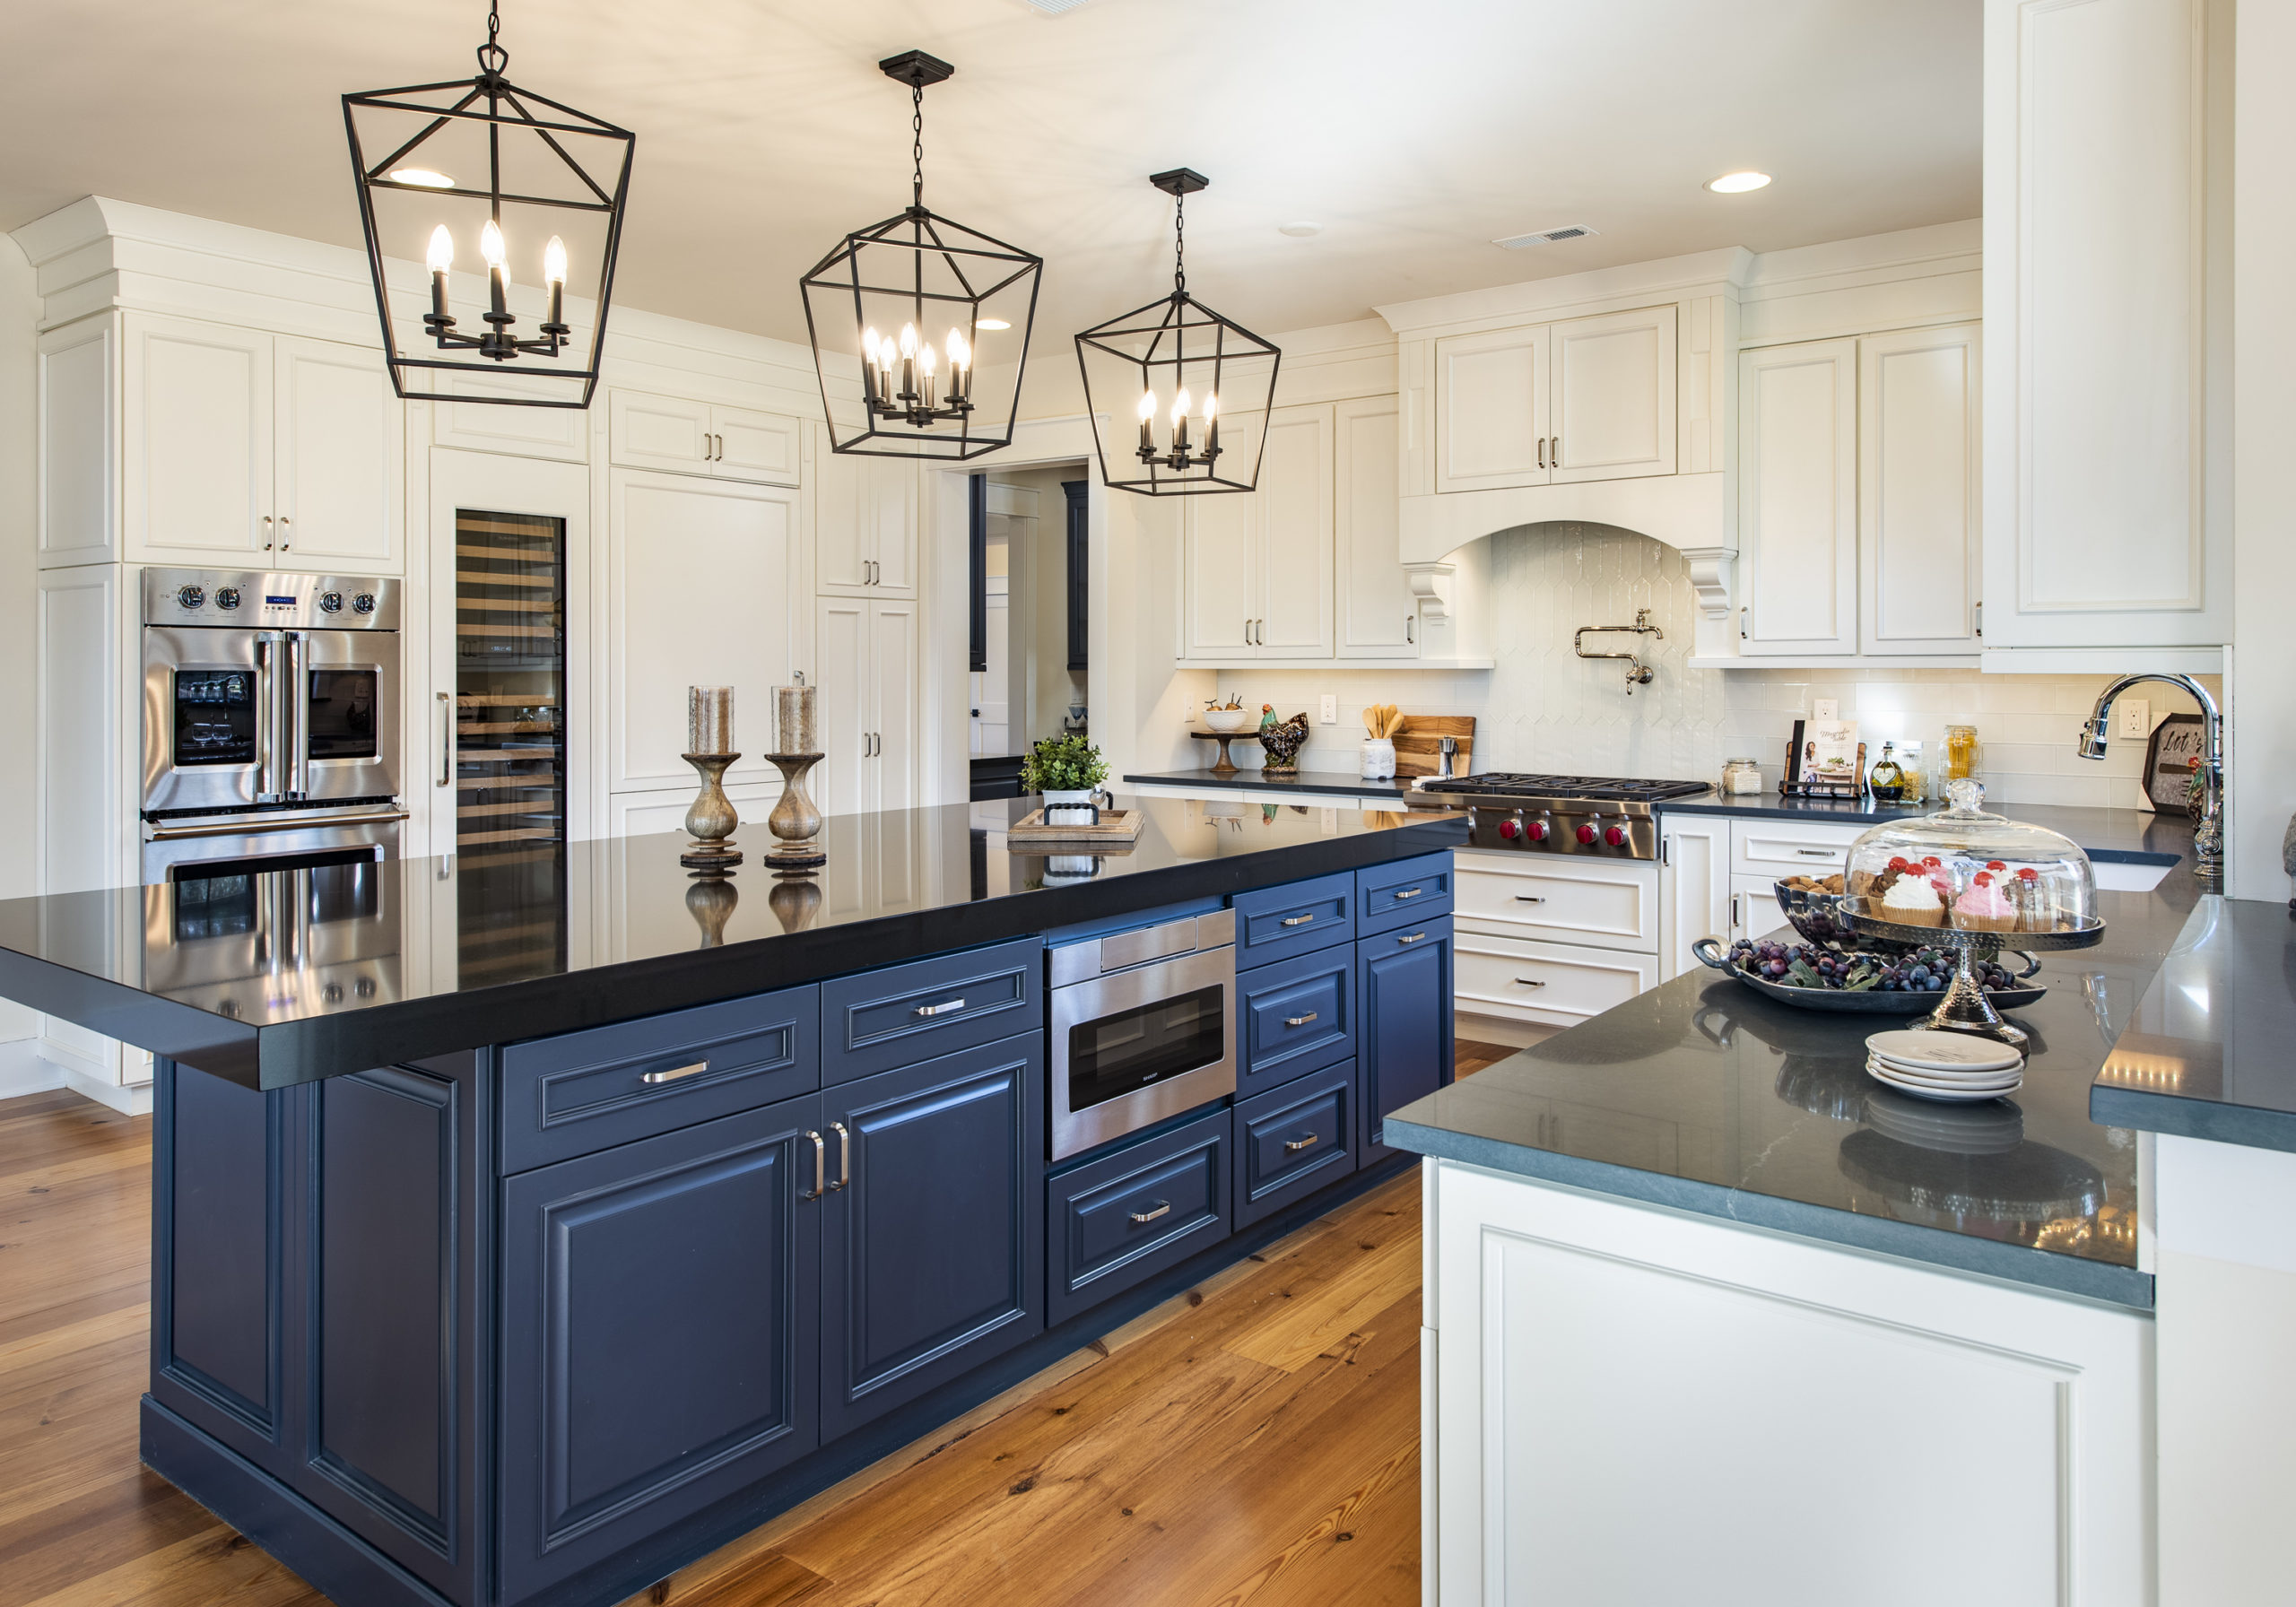 18 Kitchen Design Trends   PA New Homes   DeLuca Homes